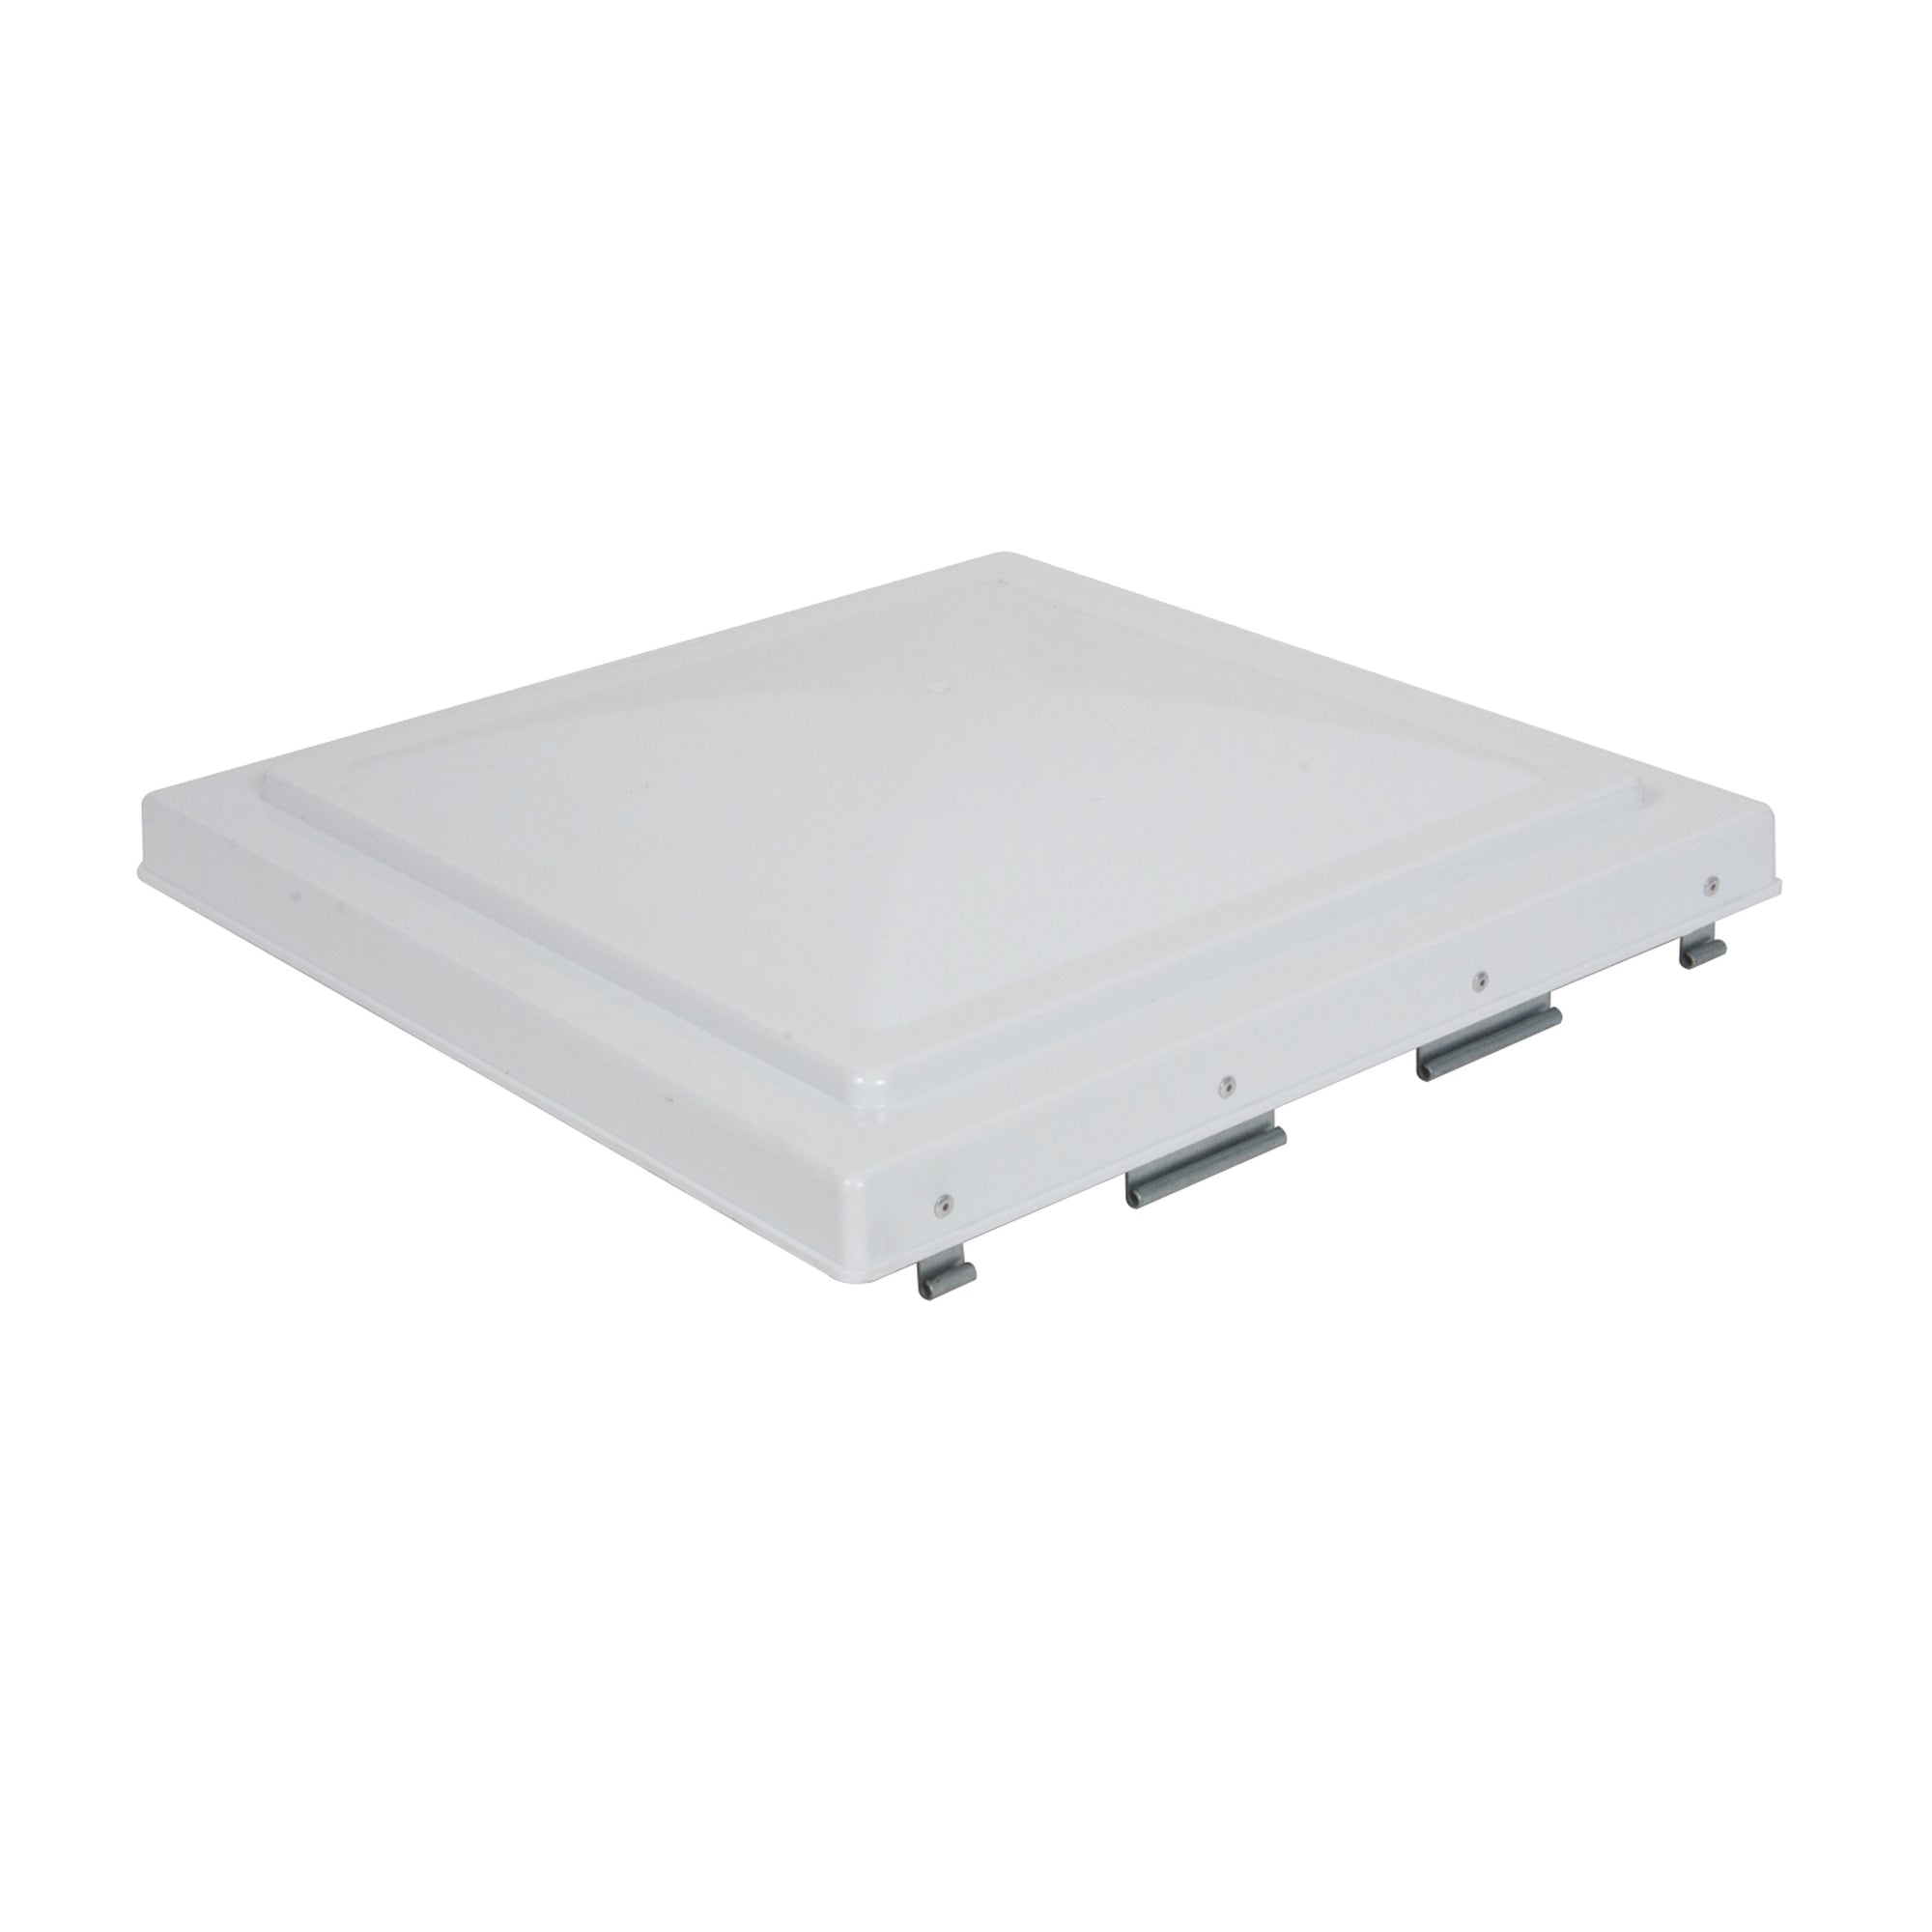 Camco 40160 Unbreakable Polycarbonate Vent Lid, Jensen with Pin Hinge - Pre-1994, White